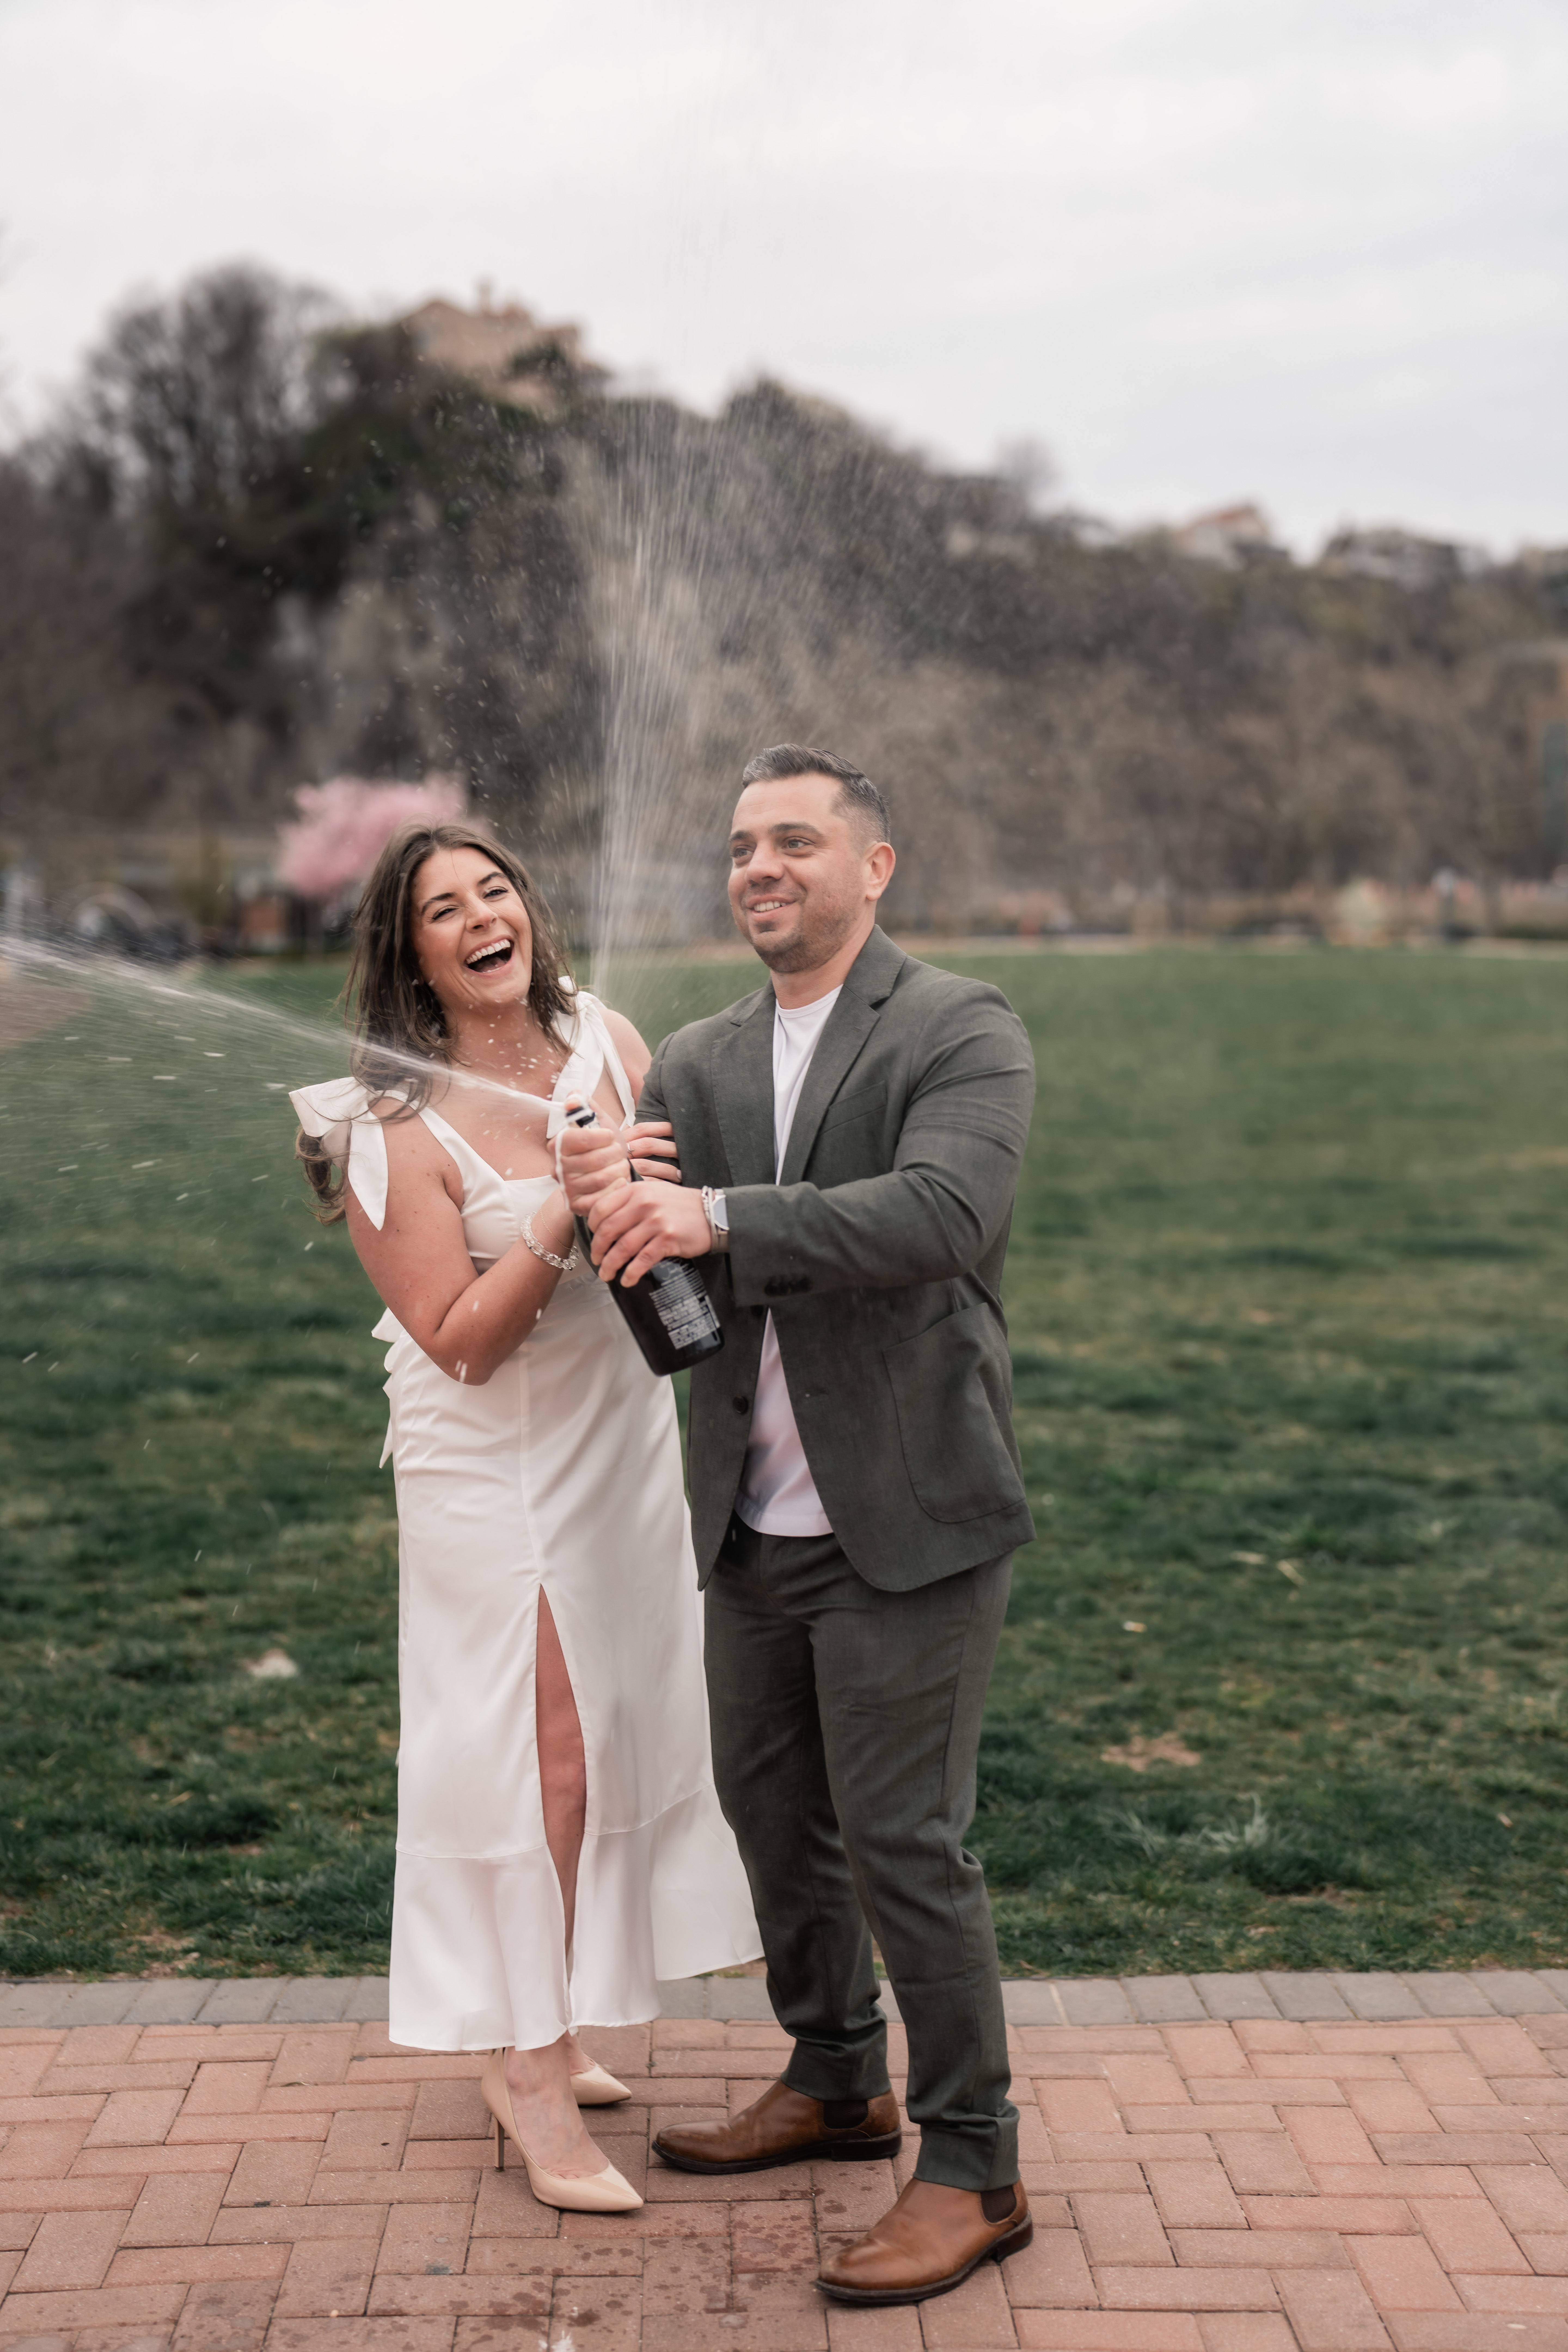 Hoboken Engagement, Hoboken NJ Engagement, Hoboken Engagement Session, Hoboken NJ Engagement Photographer, NJ Engagement Photographer, couple smiling and laughing while spraying a bottle of champagne 